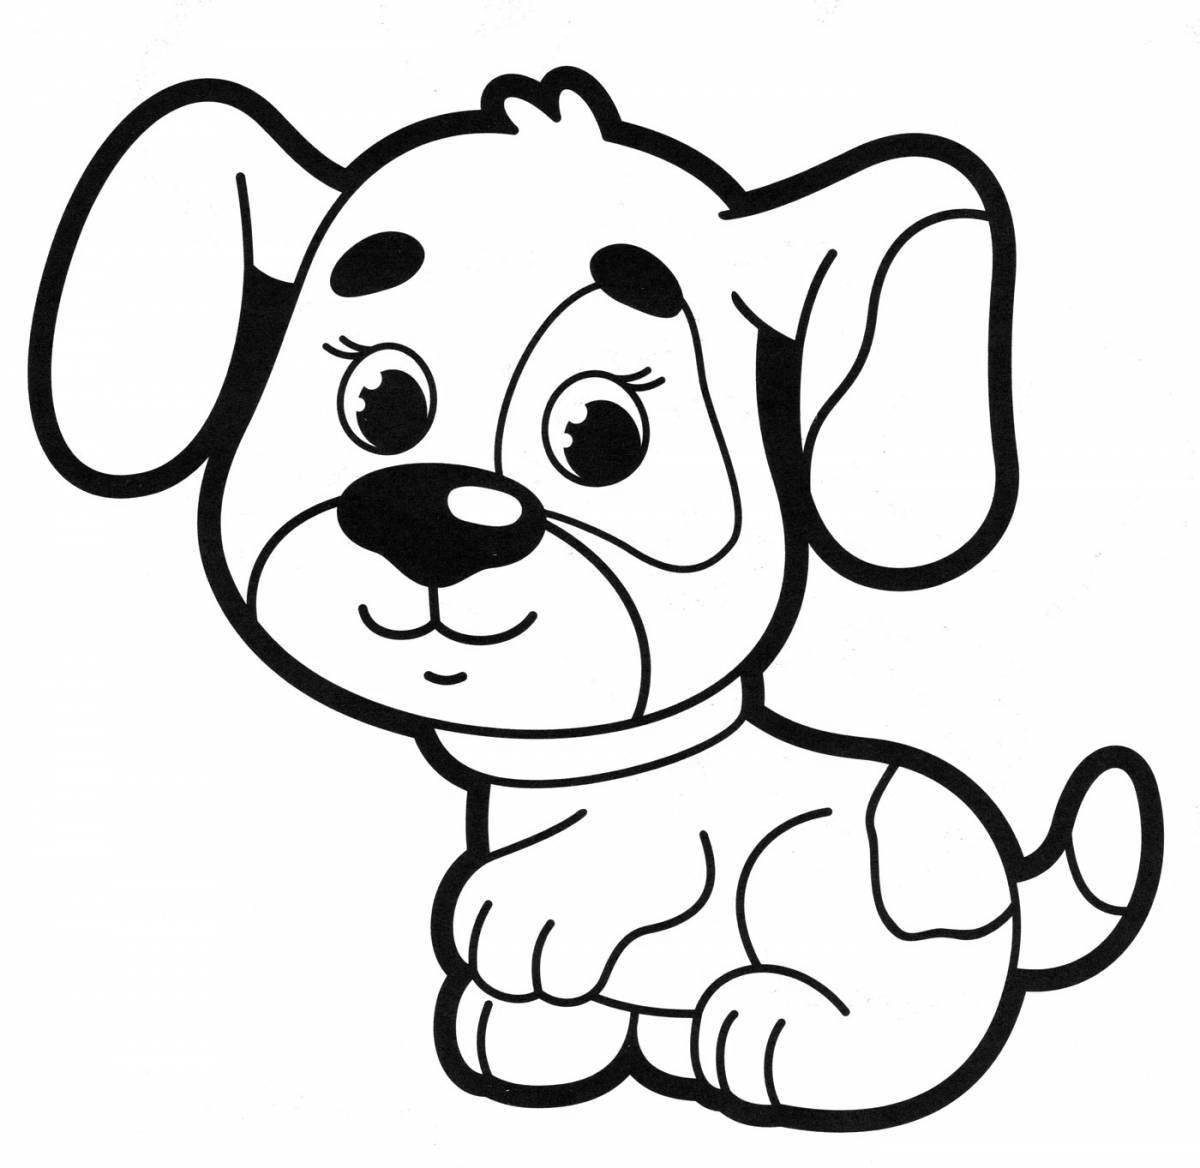 Inviting dog coloring book for children 4-5 years old